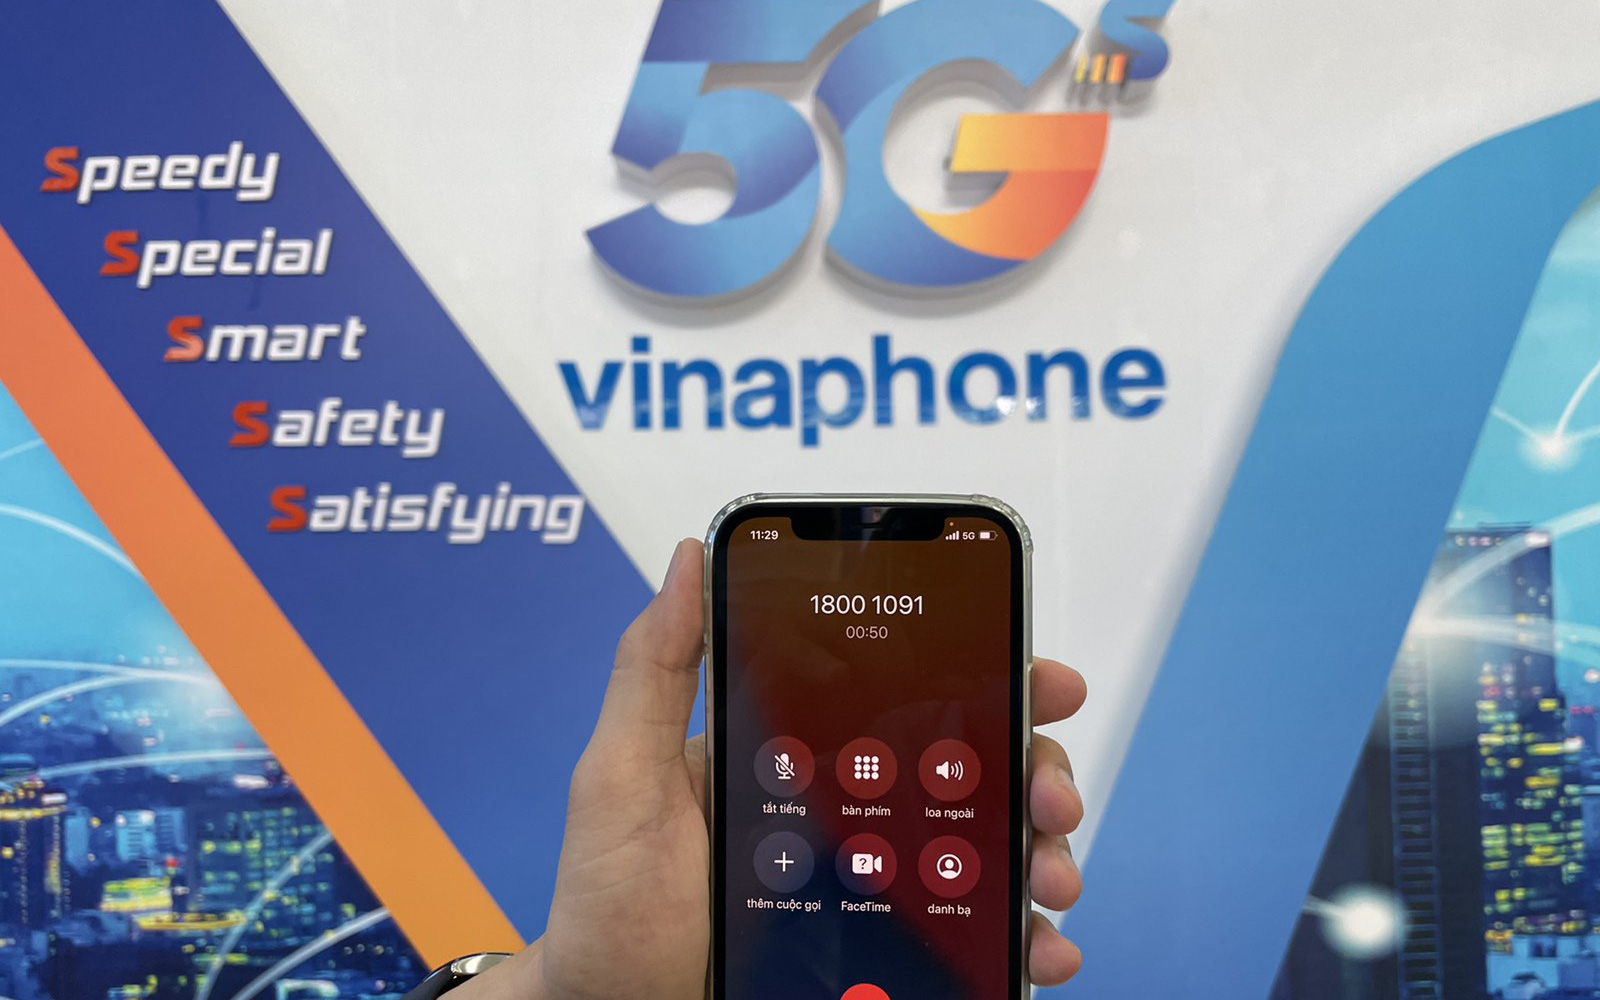 iPhone can use 5G and VoLTE services of VinaPhone